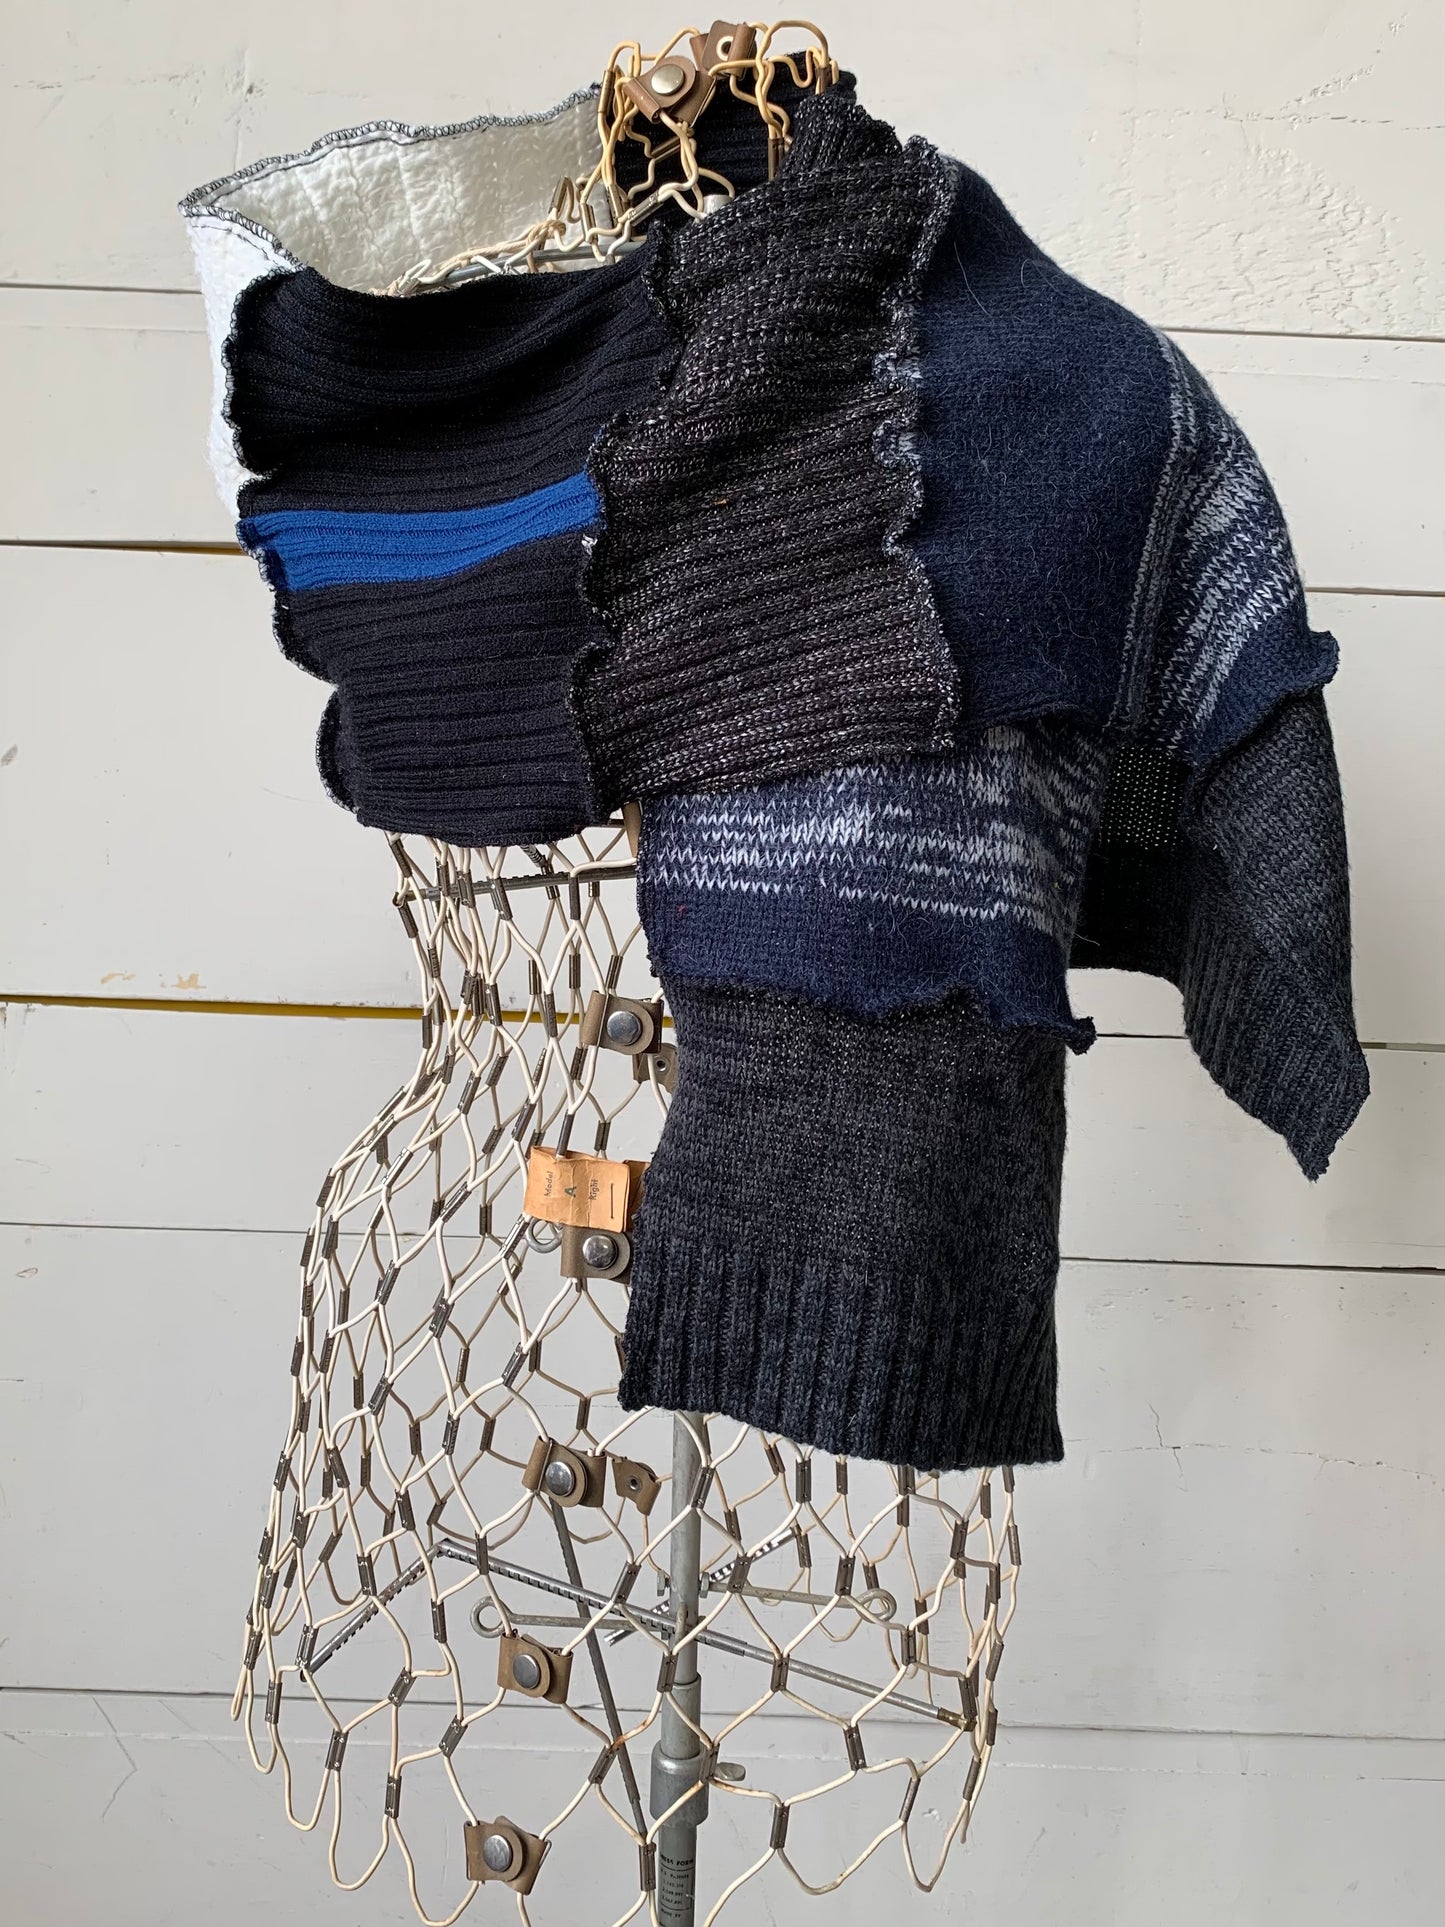 Black, grey, white and blue scarf